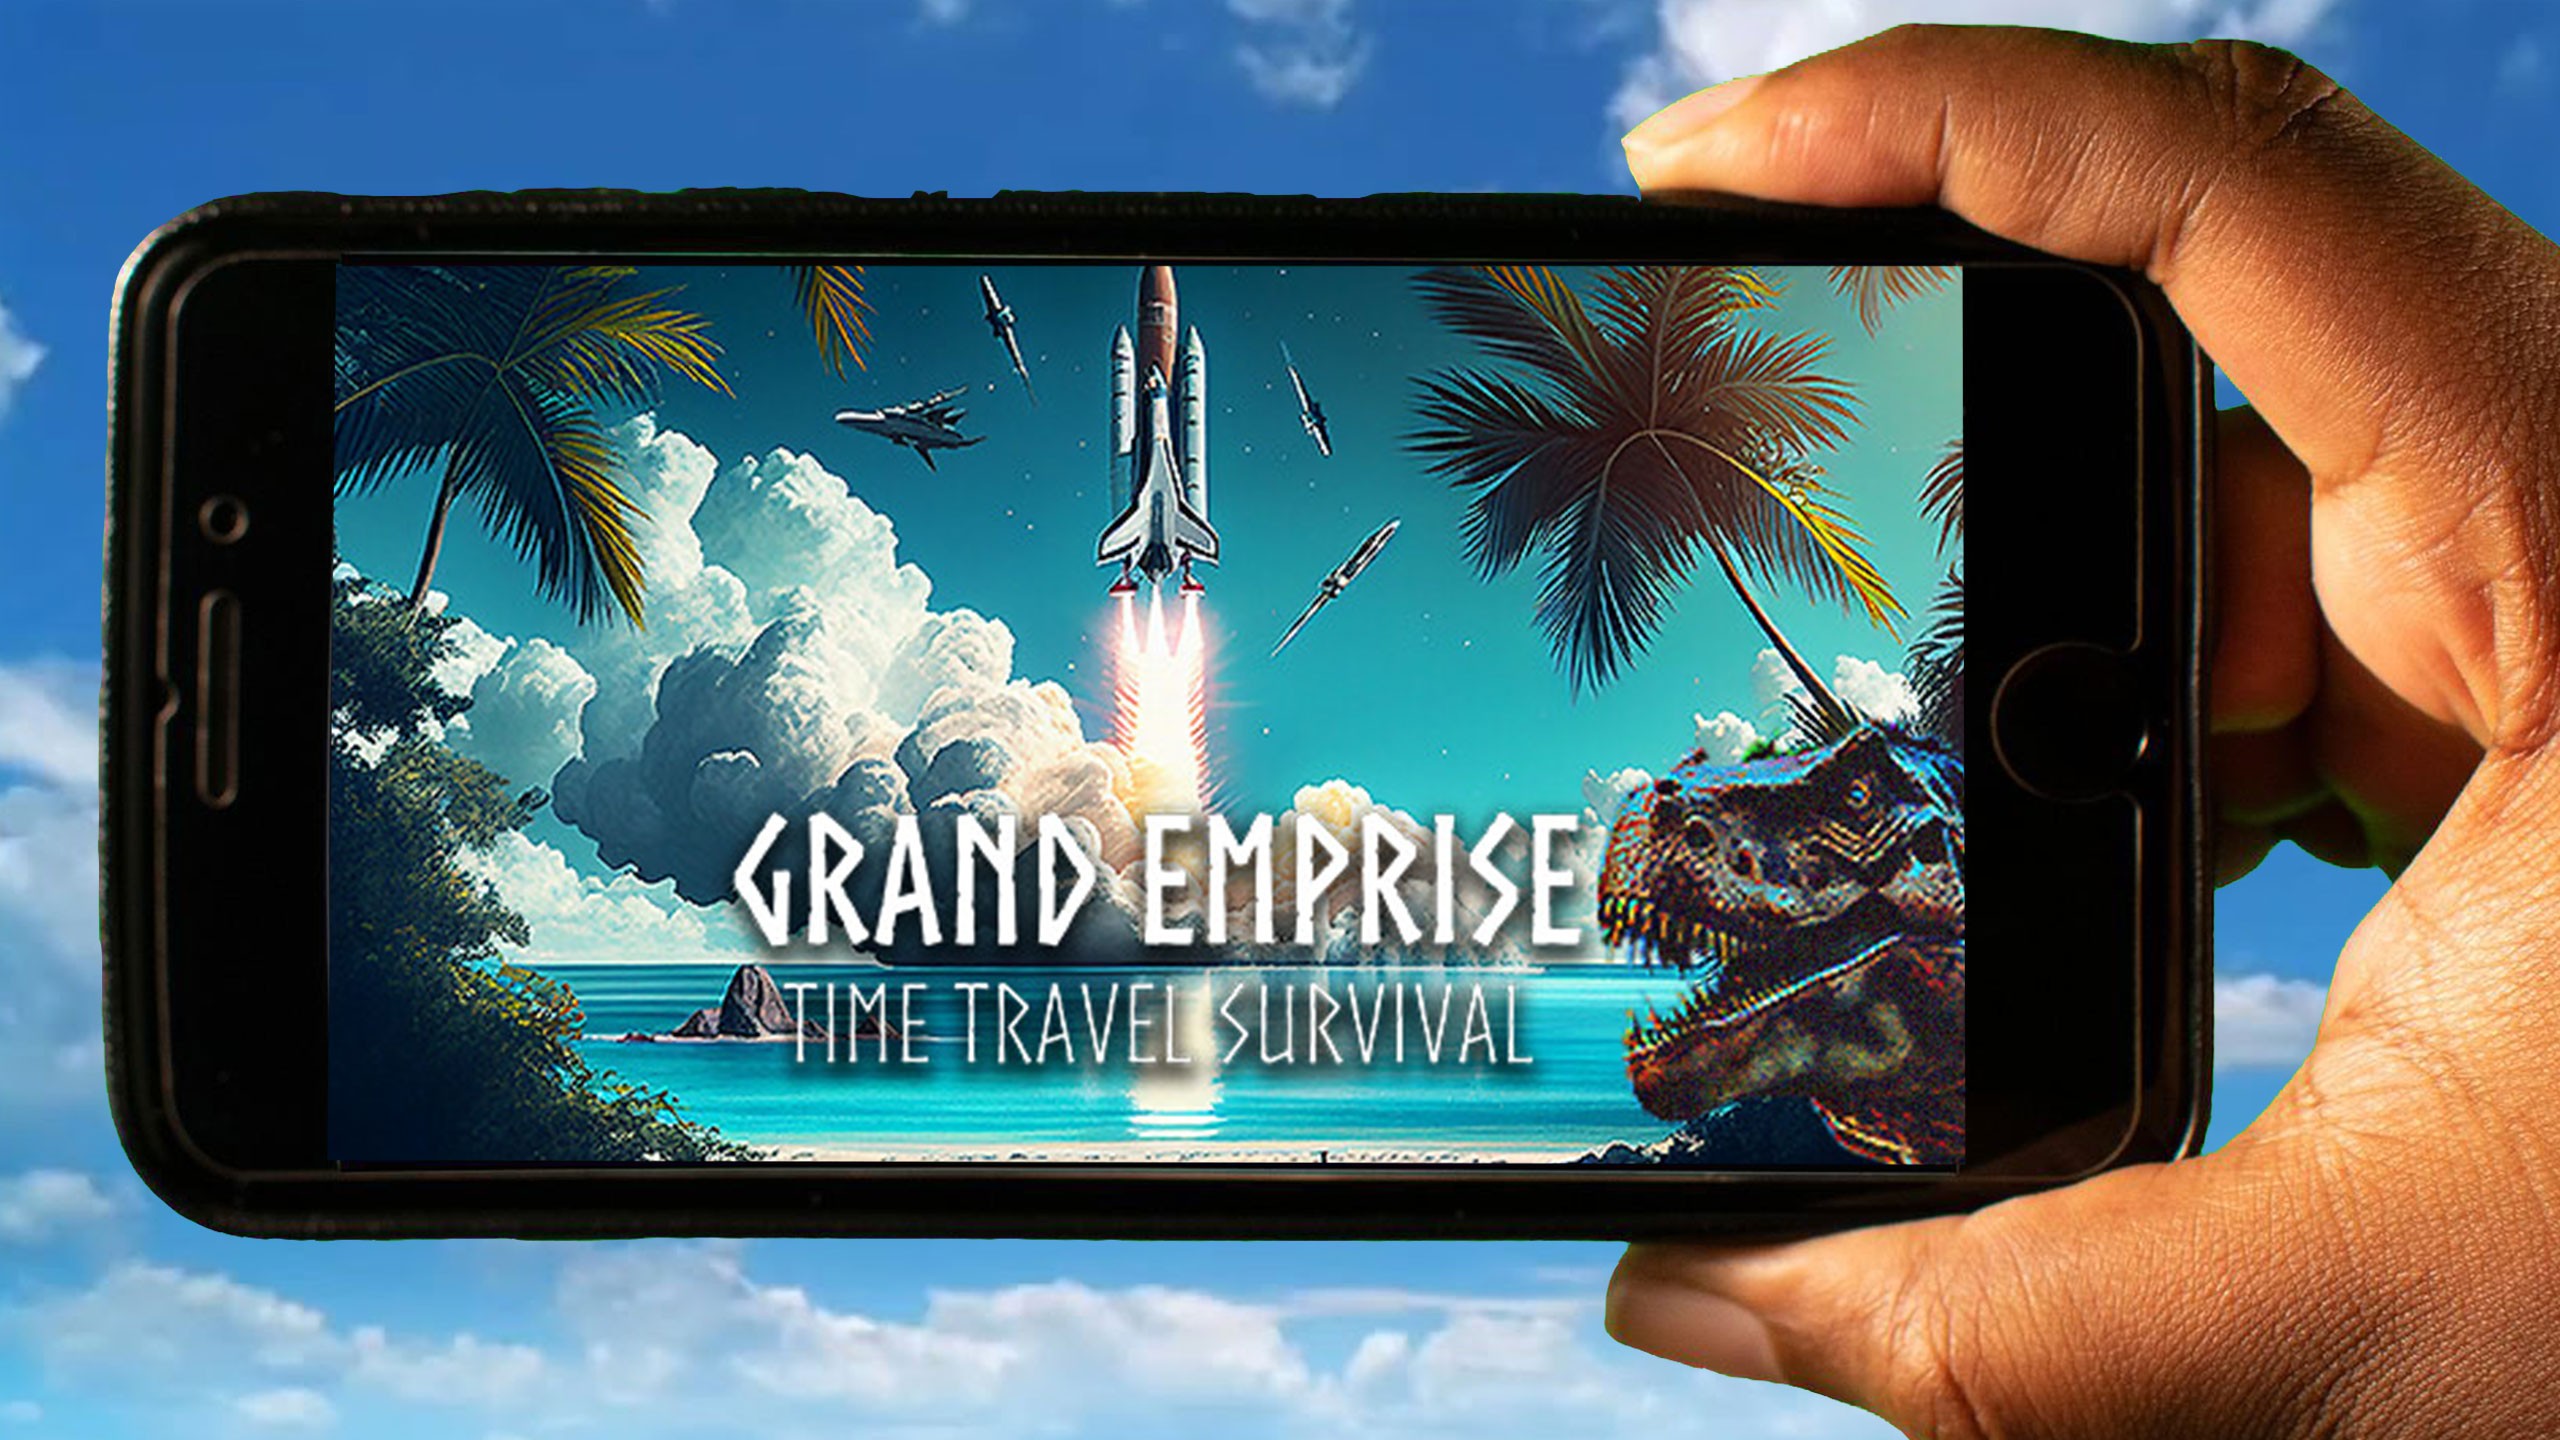 grand-emprise-time-travel-survival-mobile-how-to-play-on-an-android-or-ios-phone-games-manuals